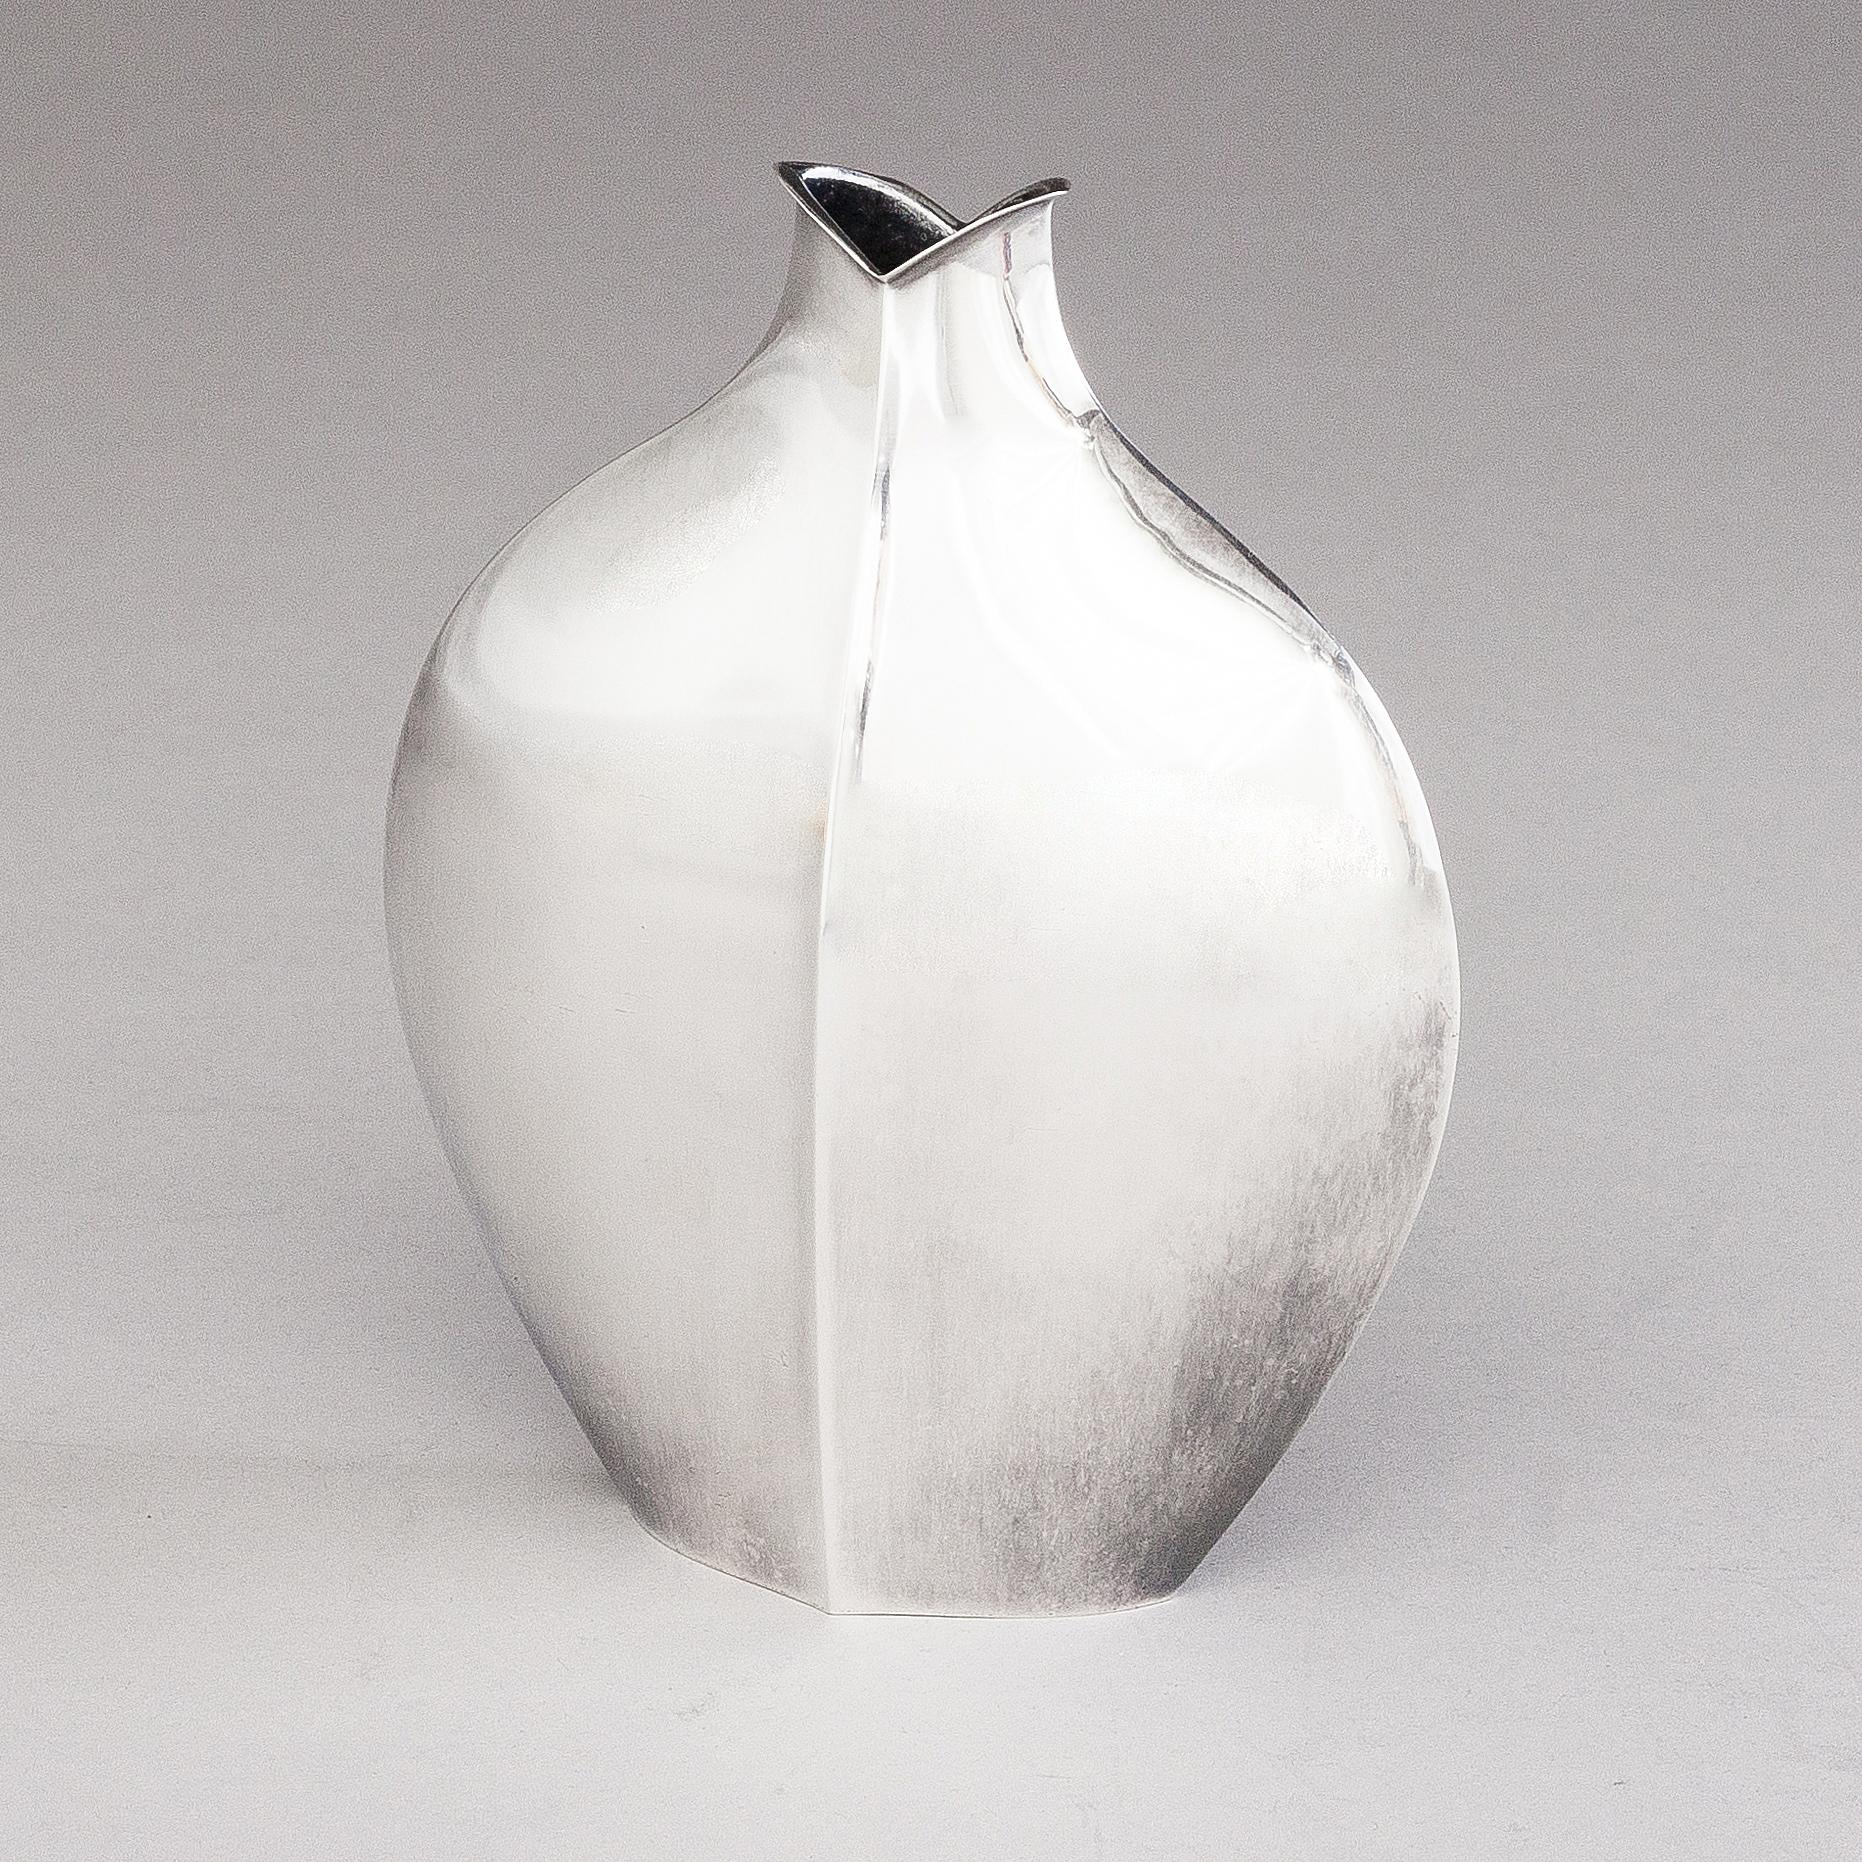 Organic and rare silver vase, designed by Tapio Wirkkala. This model was only made to order. Hopeakeskus, Hämeenlinna, 1958. The vase in in very good vintage condition.